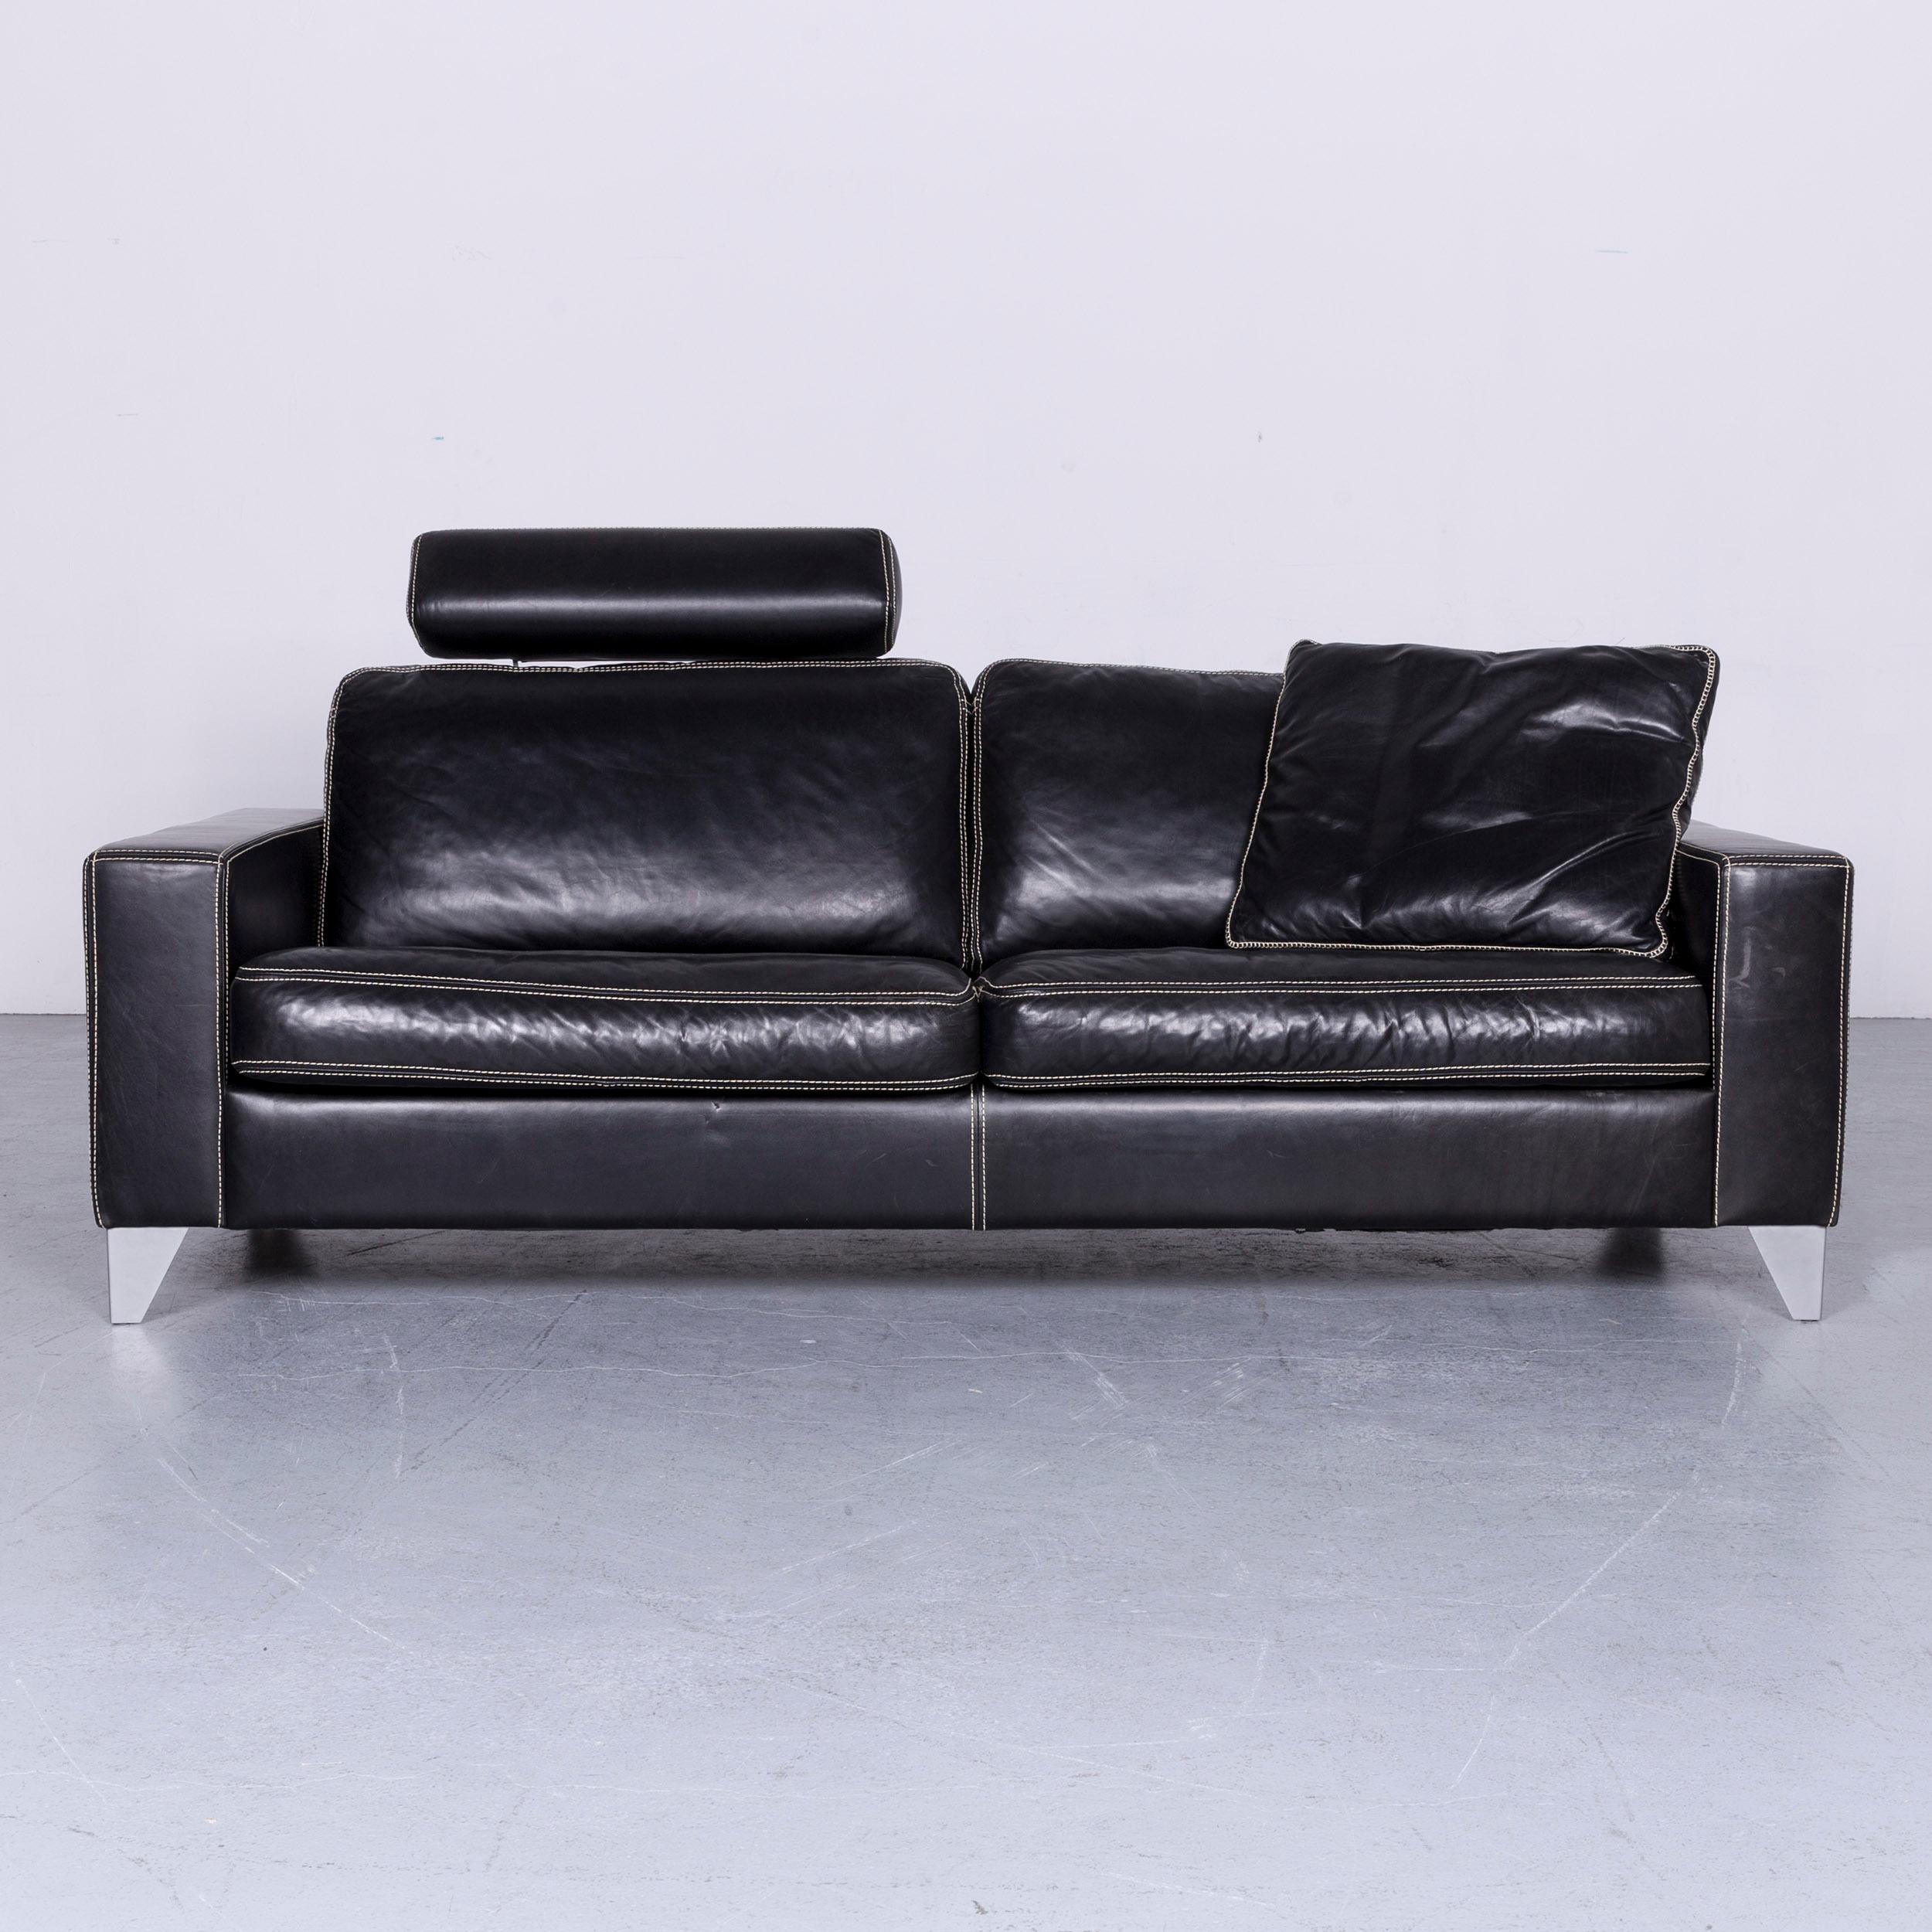 We bring to you an activineo designer leather sofa black two-seat couch.